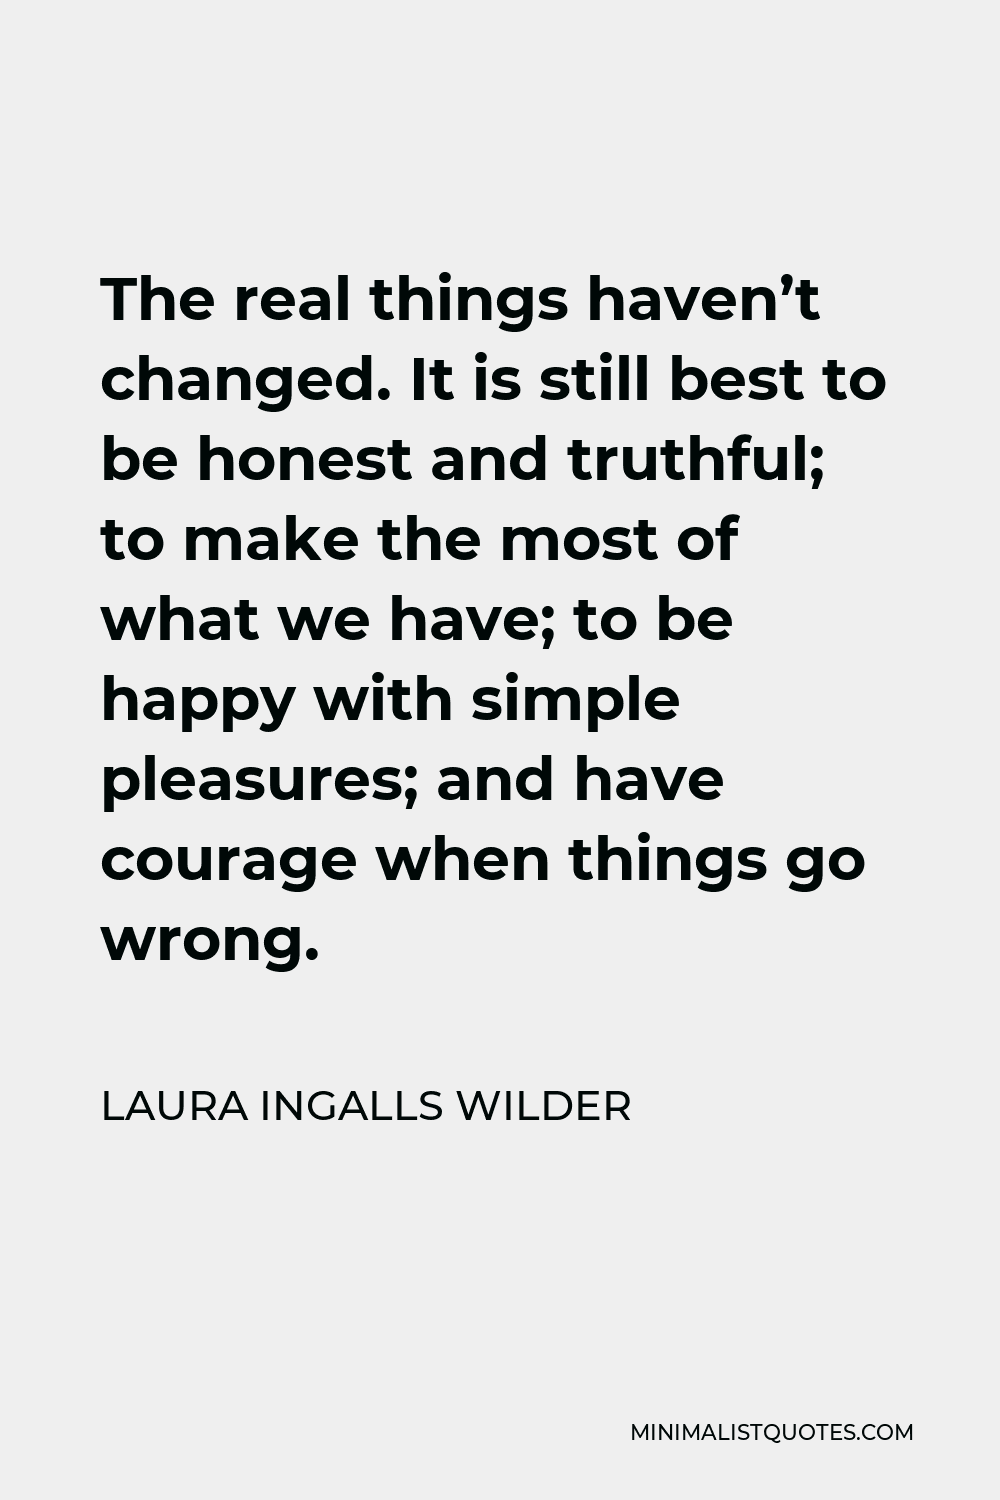 Laura Ingalls Wilder Quote - The real things haven’t changed. It is still best to be honest and truthful; to make the most of what we have; to be happy with simple pleasures; and have courage when things go wrong.